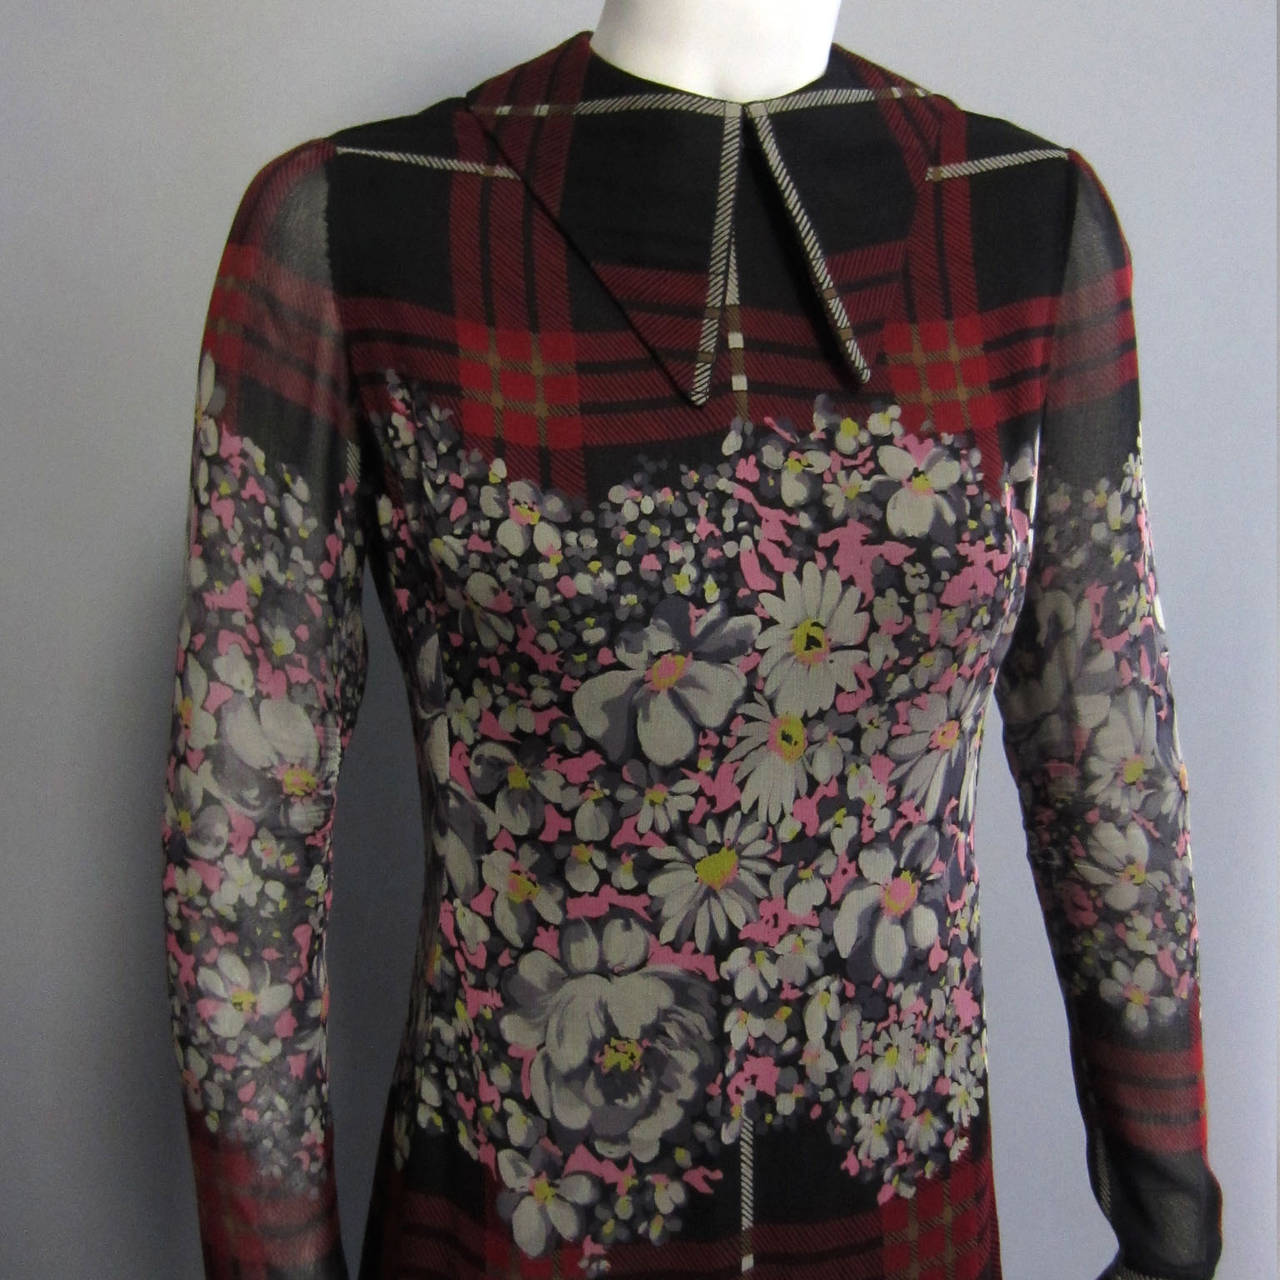 A beautiful 1970s piece from American designer JAMES GALANOS. This dress is made of silk chiffon. The oversized, burgundy and white plaid is set against a dark background. The graphic and linear plaid is broken up by an intricate, floral print